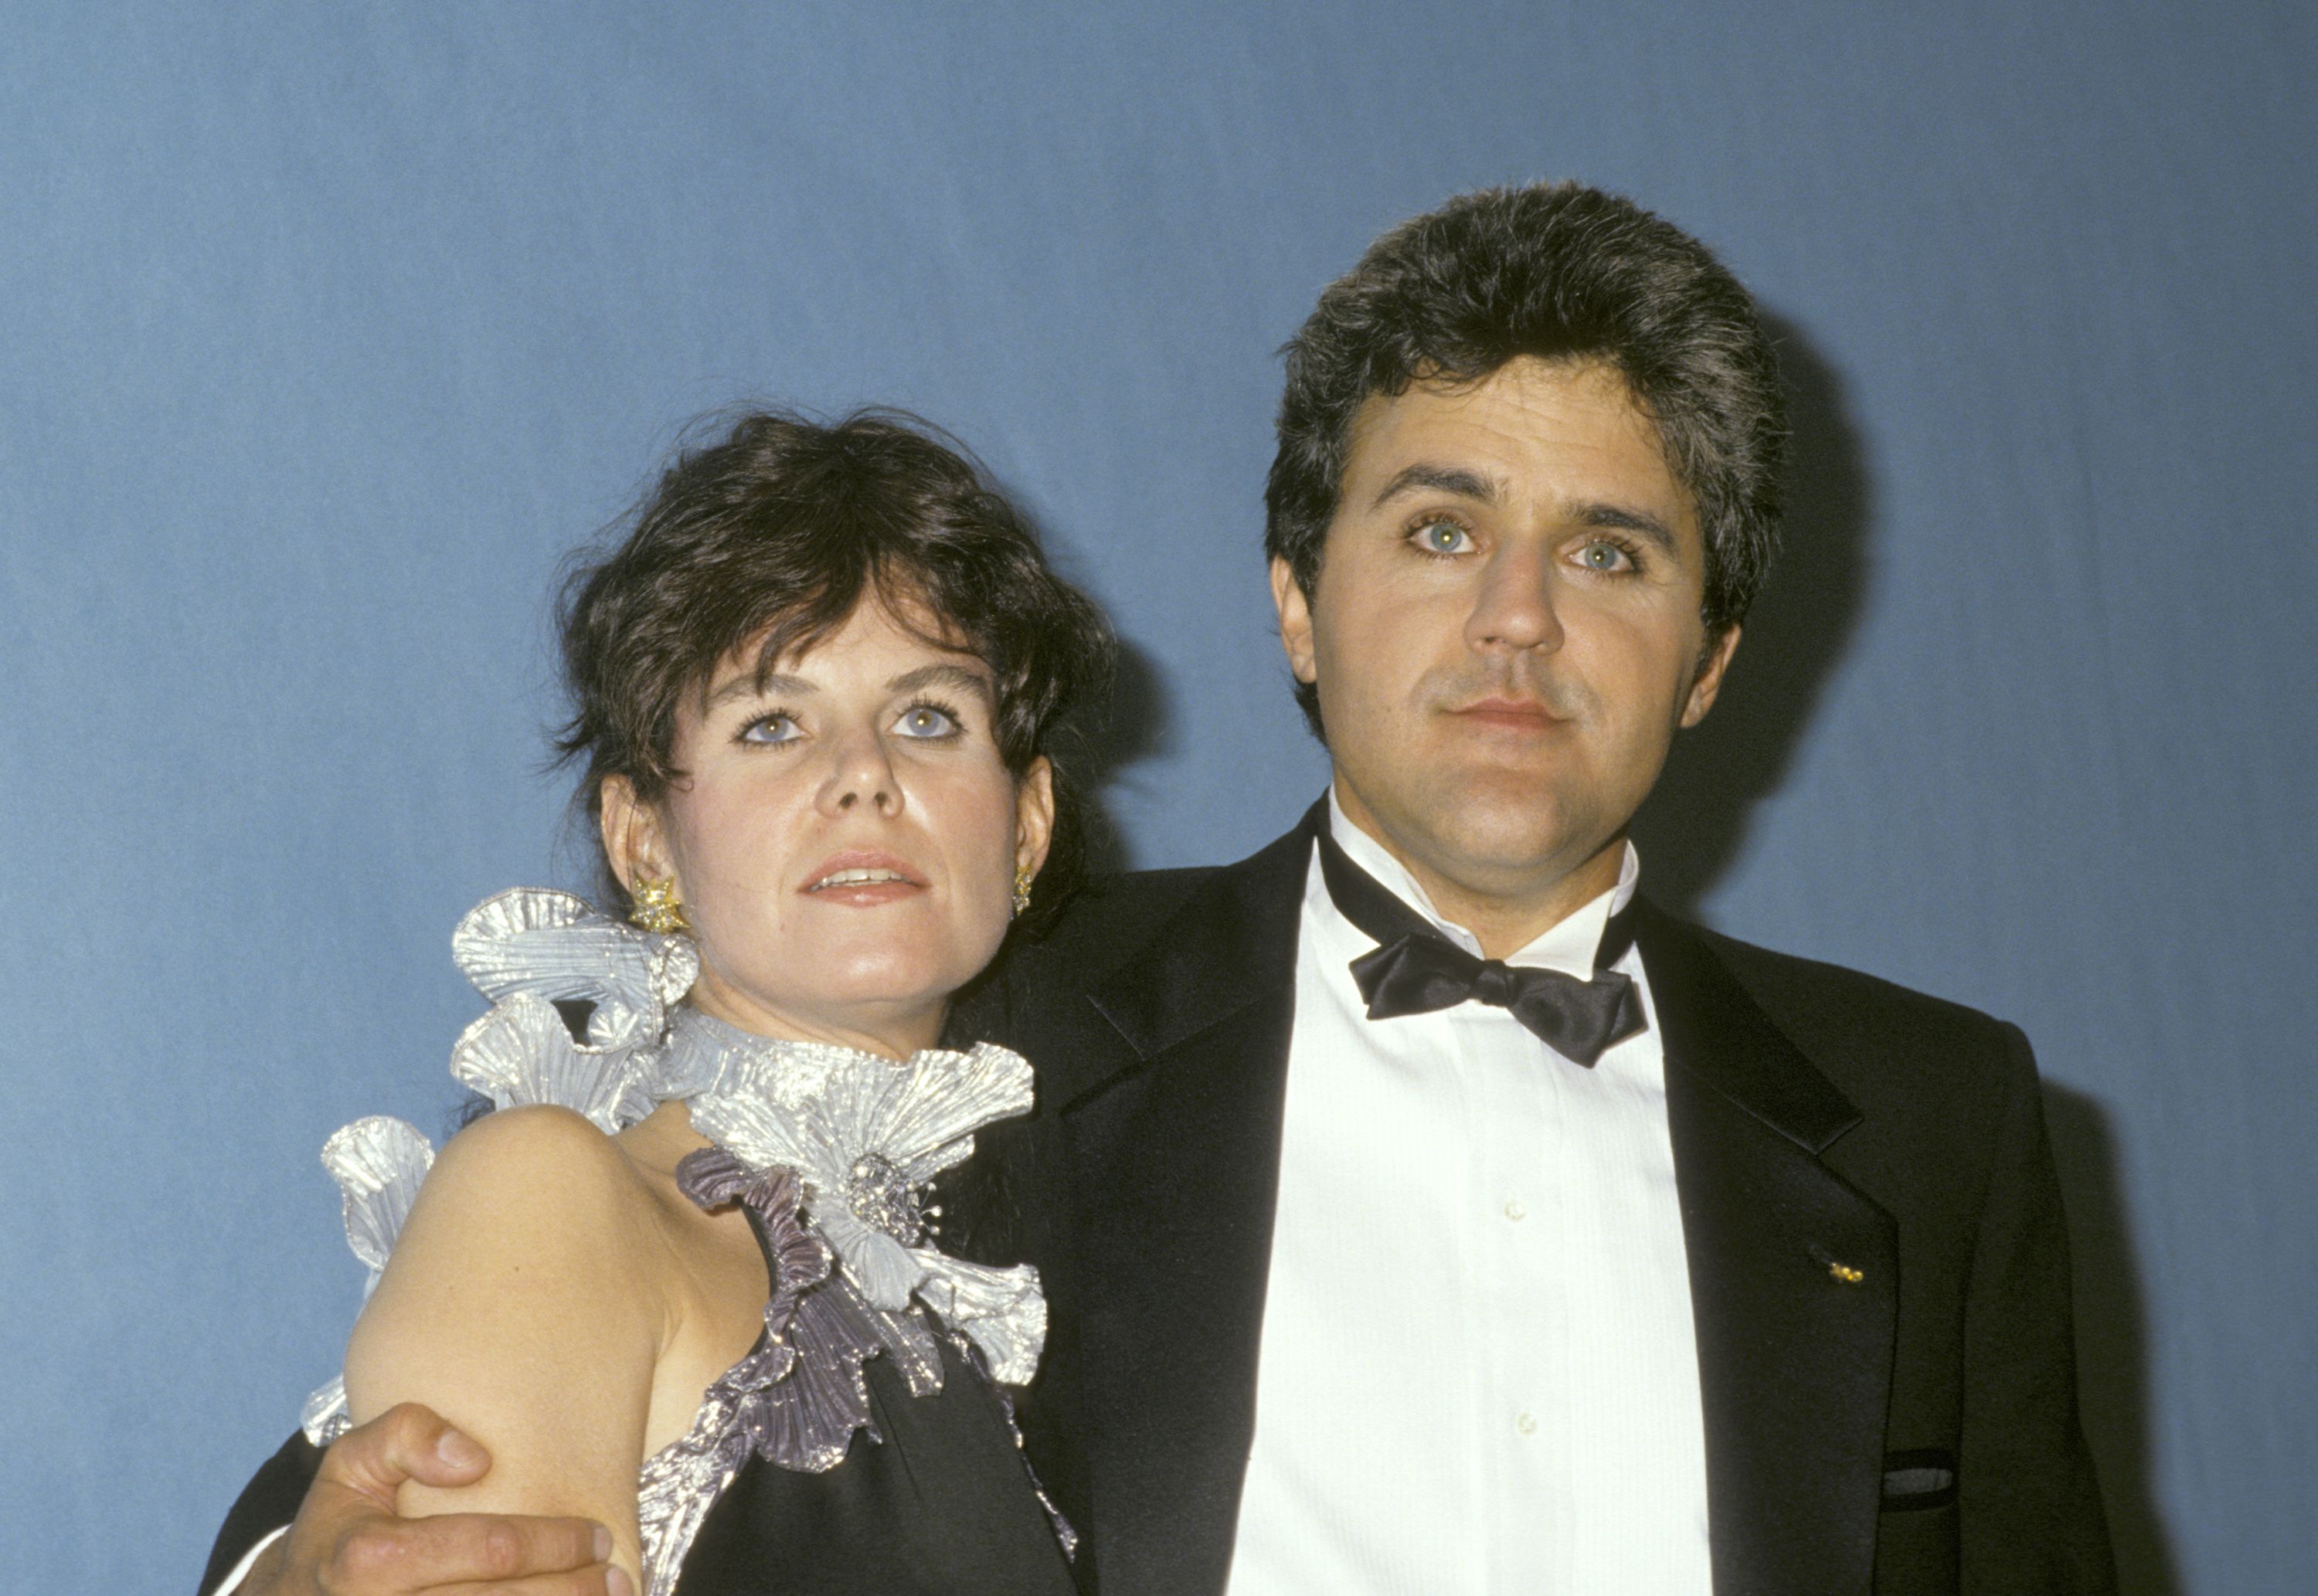 Mavis and Jay Leno during the 39th Annual Emmy Awards on September 20, 1987, in Pasadena, California. | Source: Getty Images